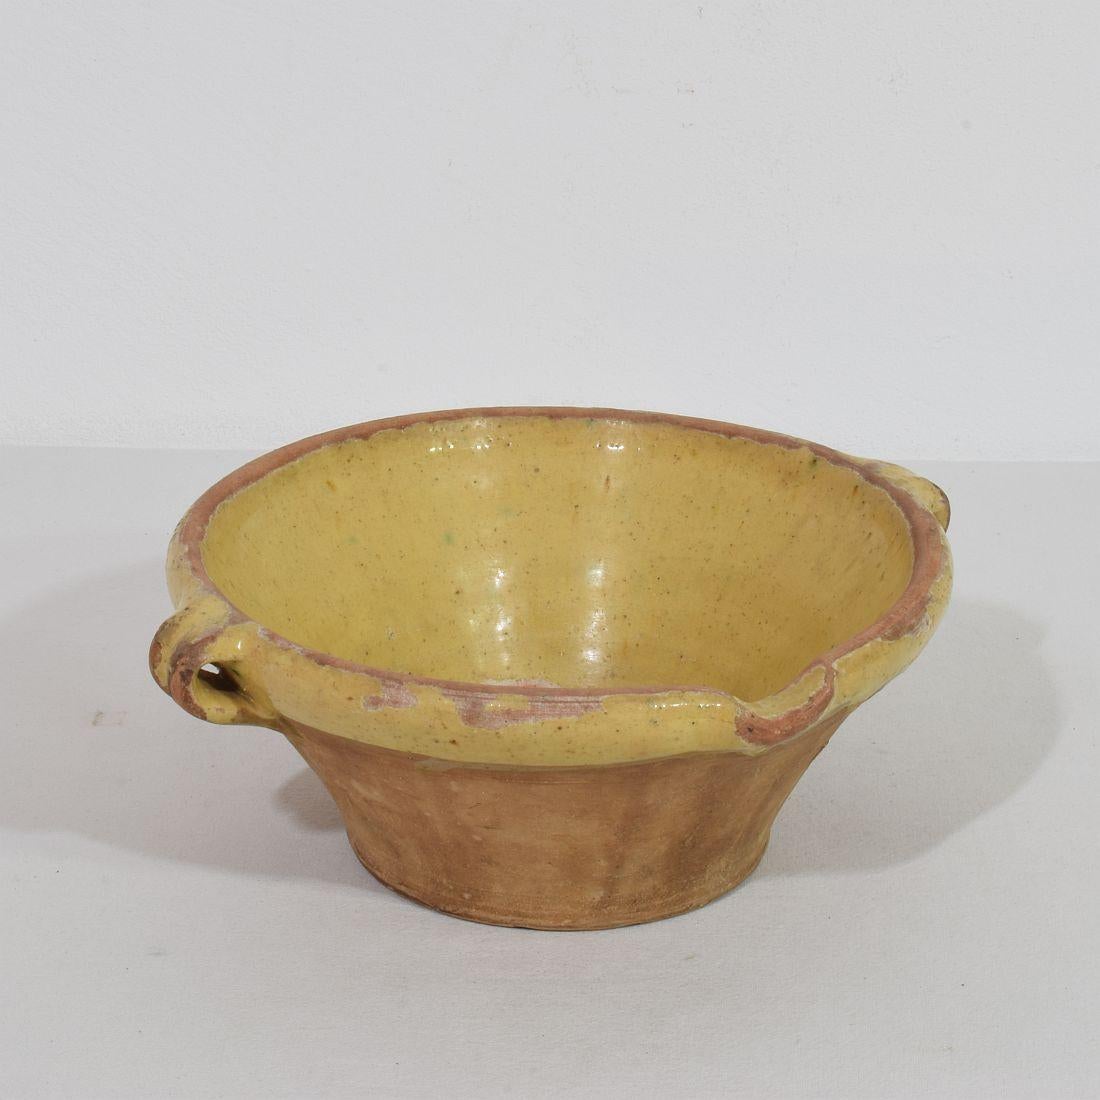 French Provincial Small 19th Century French Yellow Glazed Terracotta Dairy Bowl or Tian For Sale